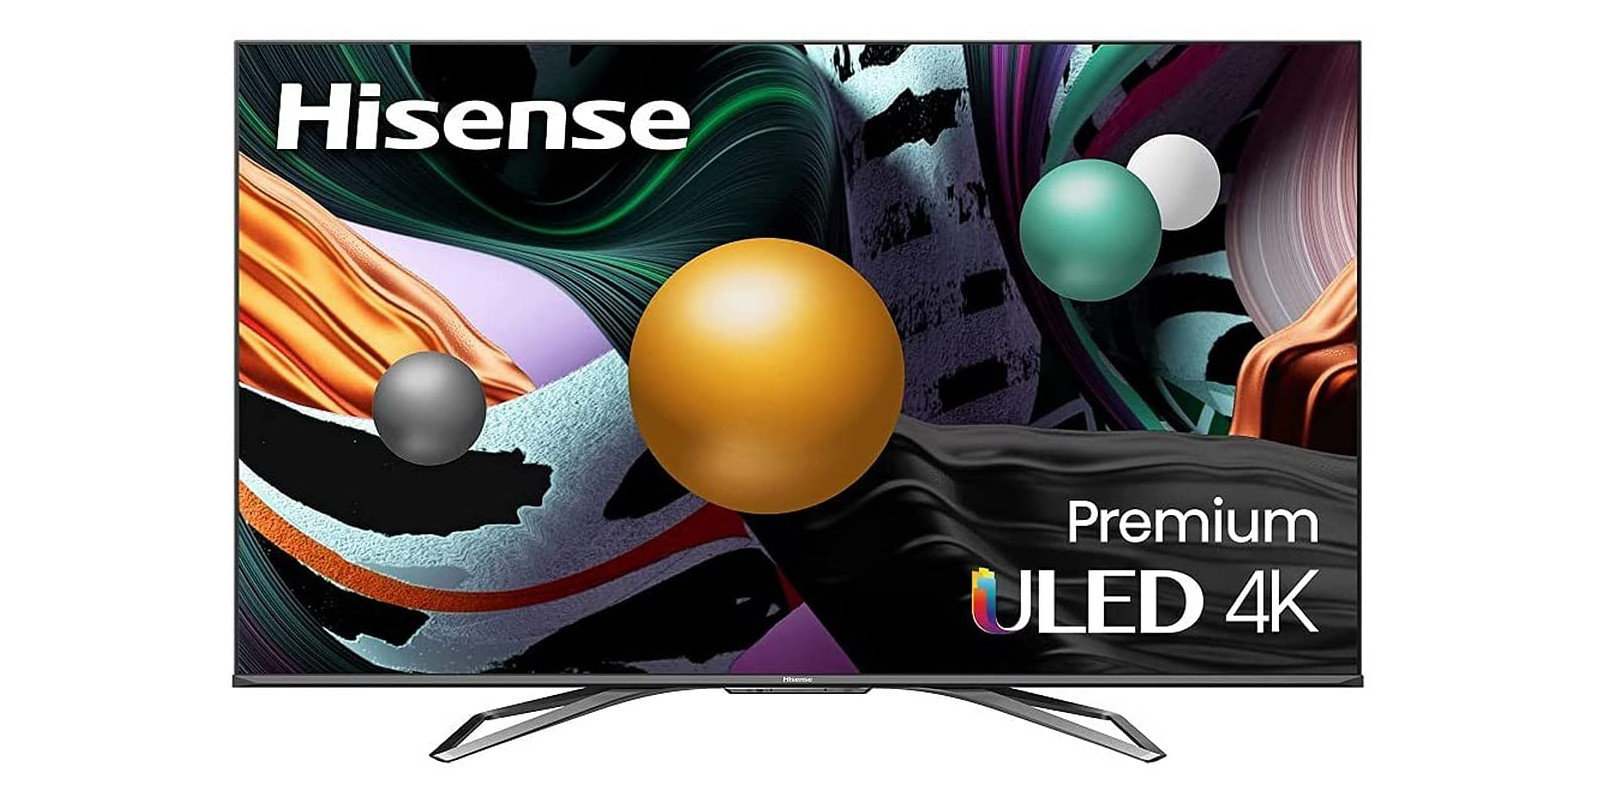 Hisense Announces New Uled Tvs With Roku And Android Tv